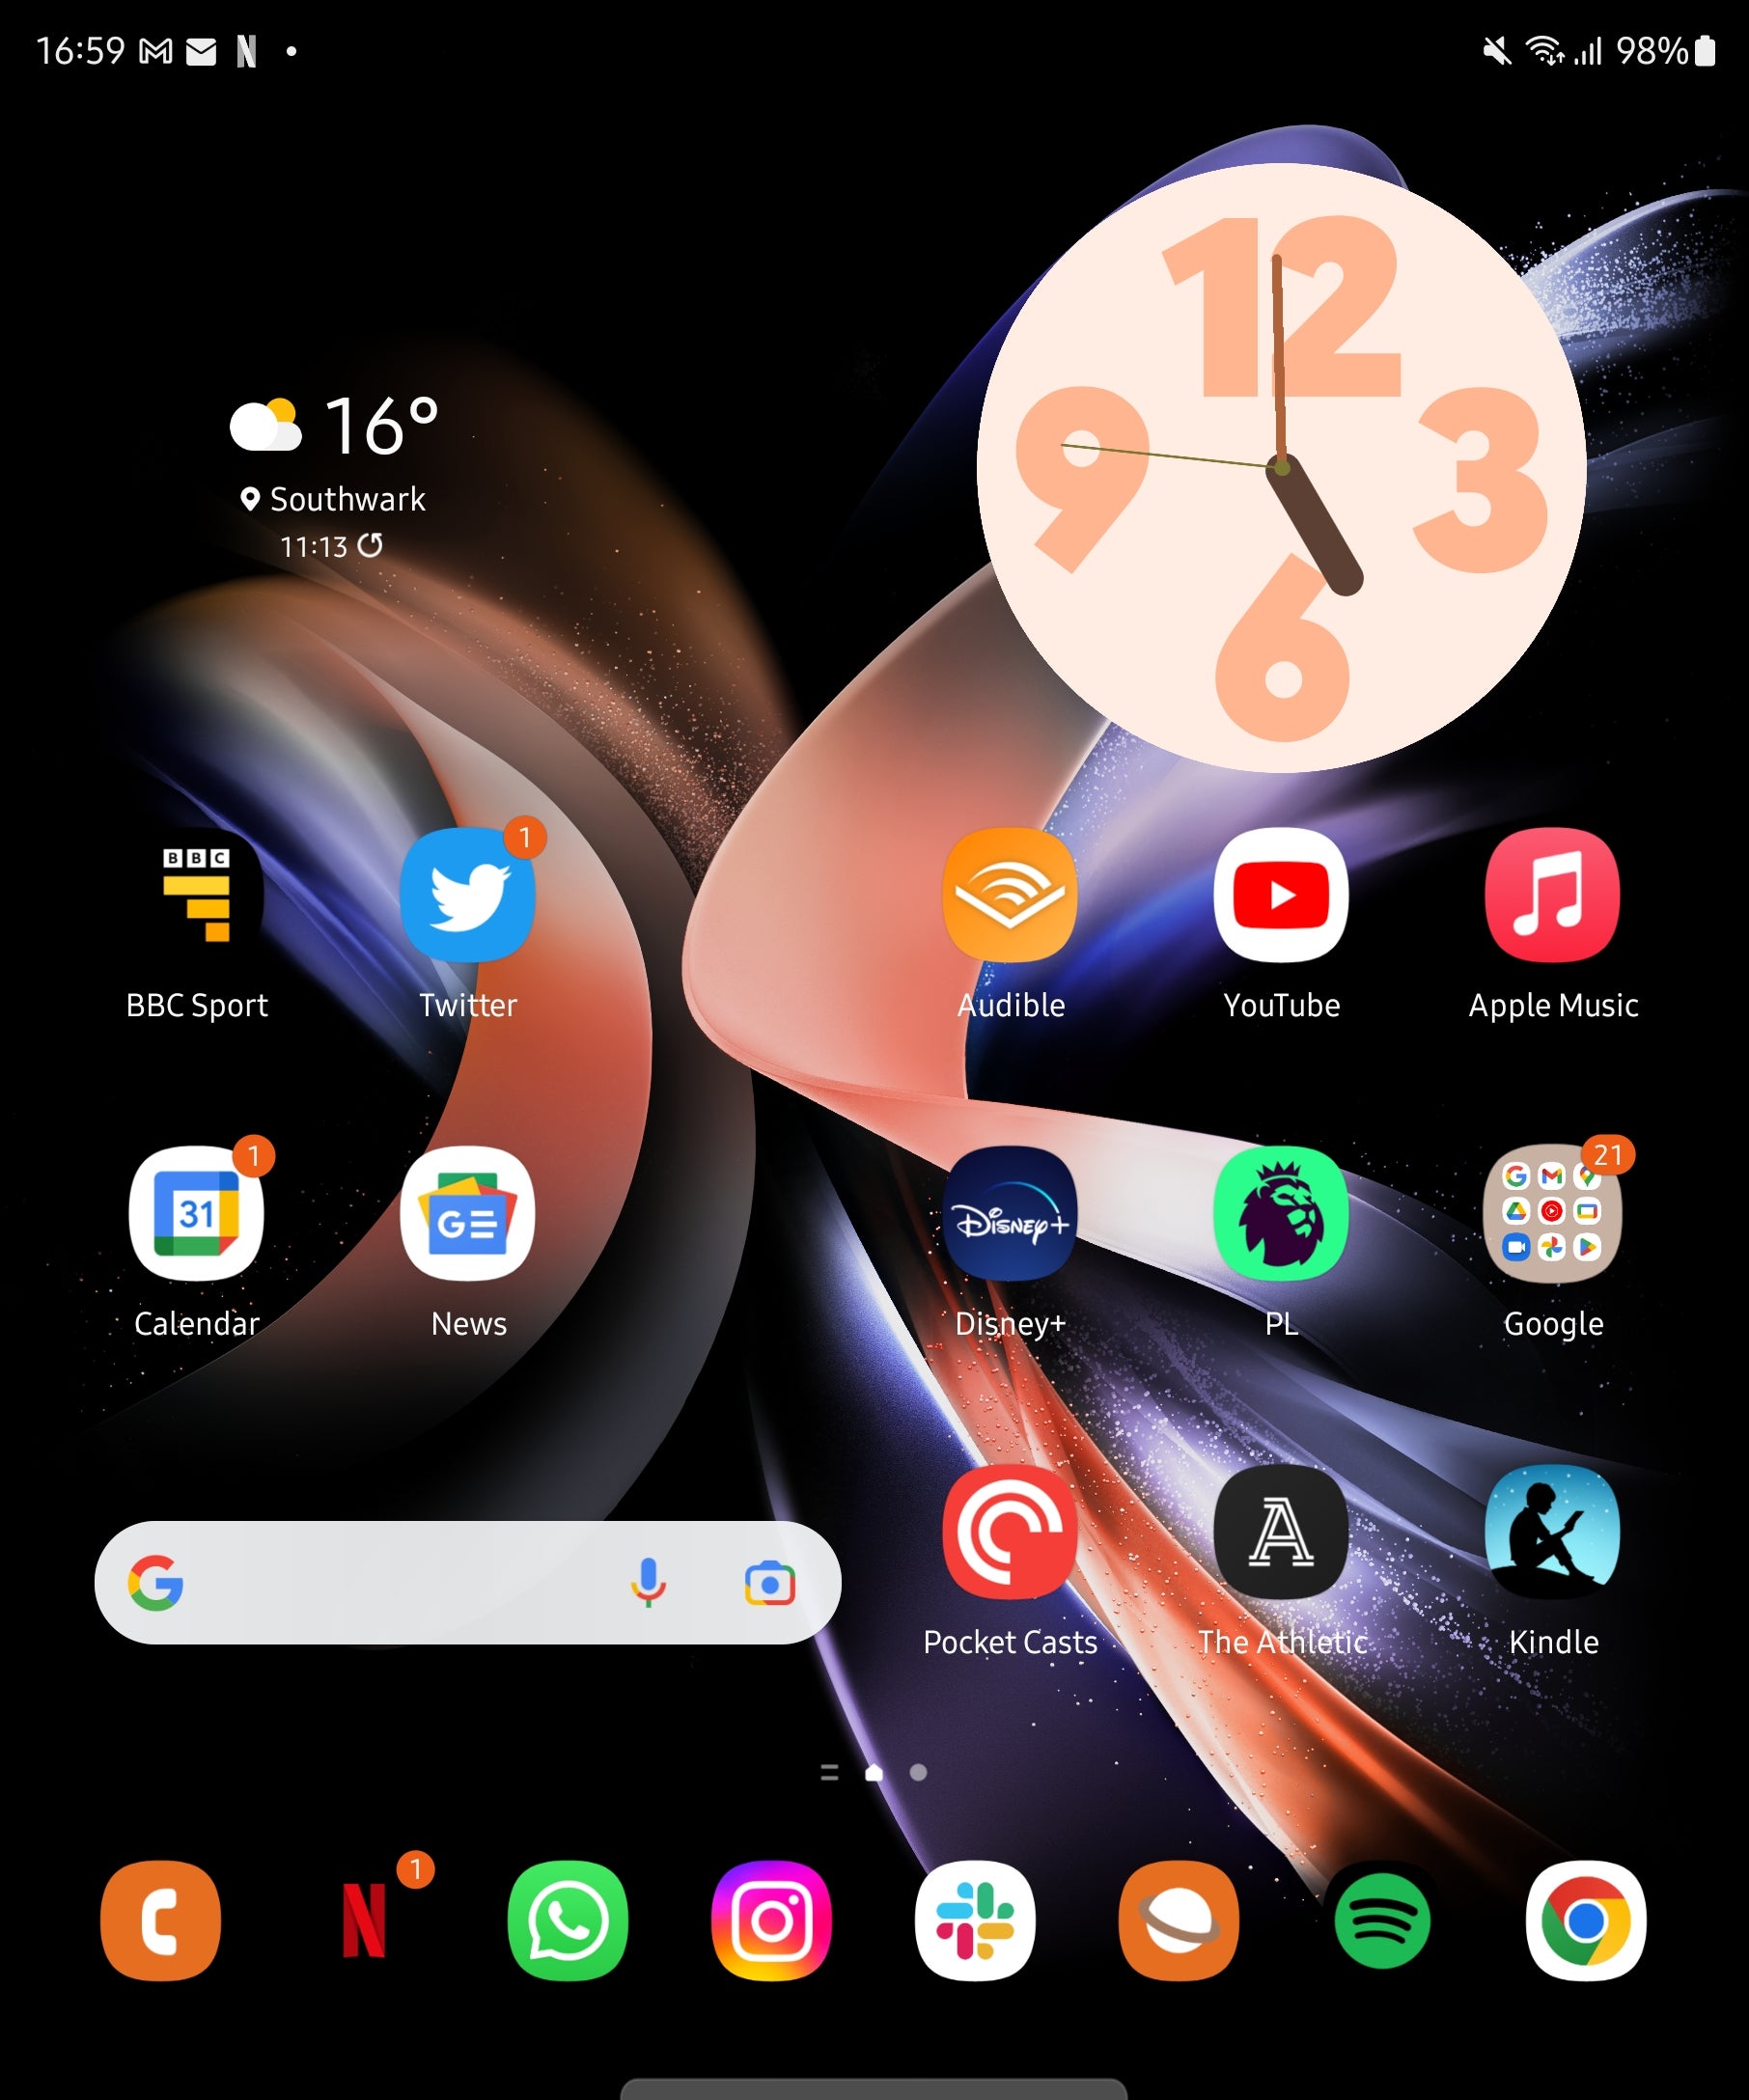 Go to home screen